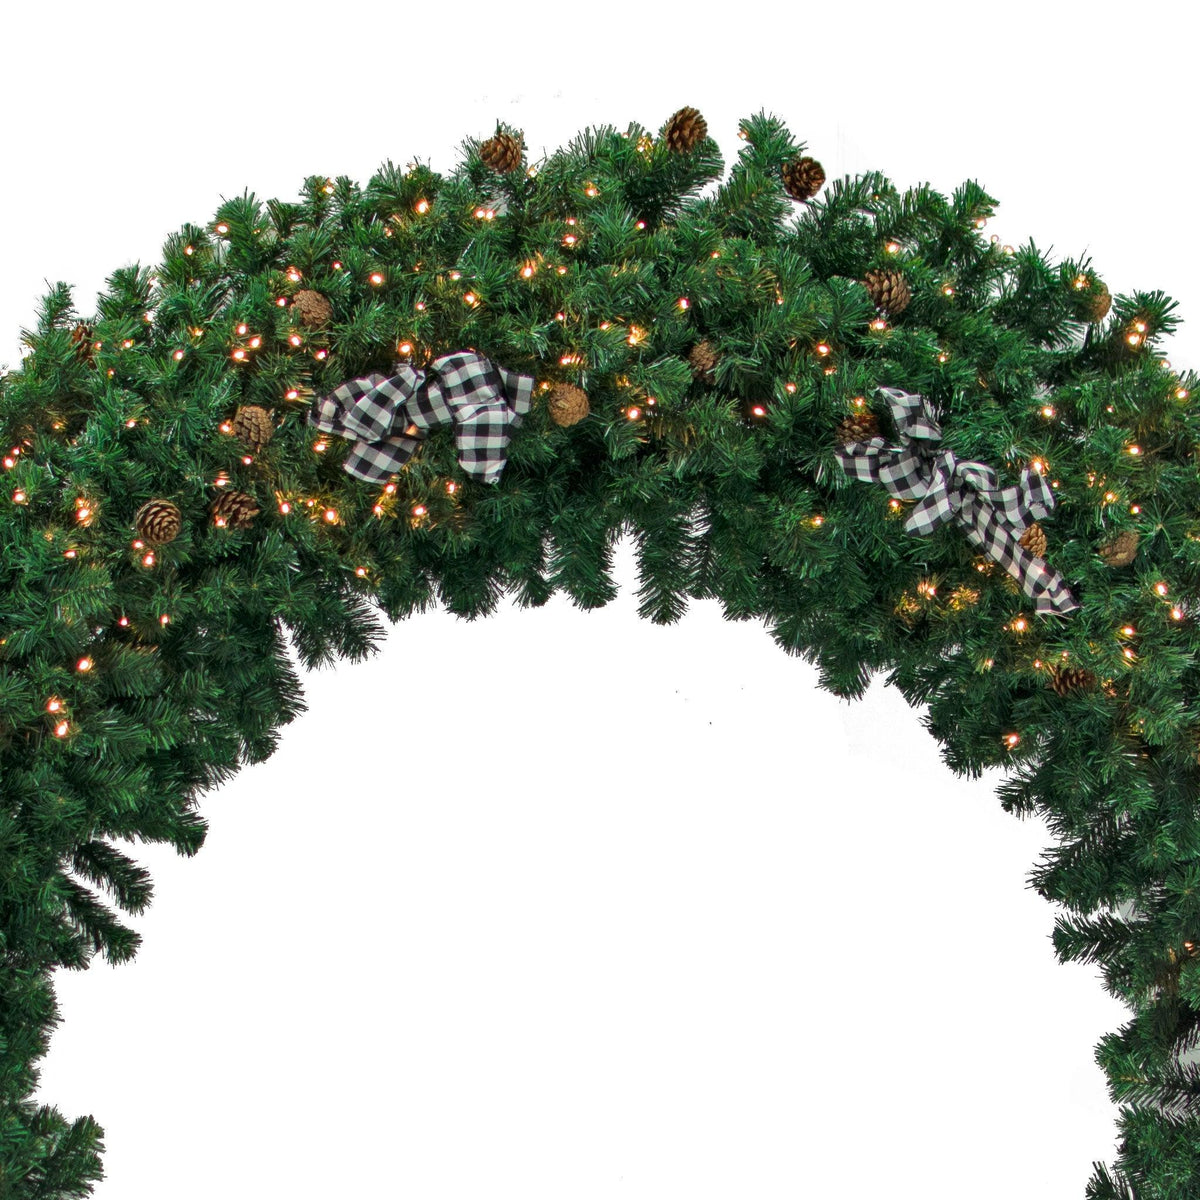 Lee Display's brand new and custom-designed 8FT Pre-Lit Premier Pine Fir Christmas Wreaths available for purchase, rent, and installation services.  Shop now at leedisplay.com